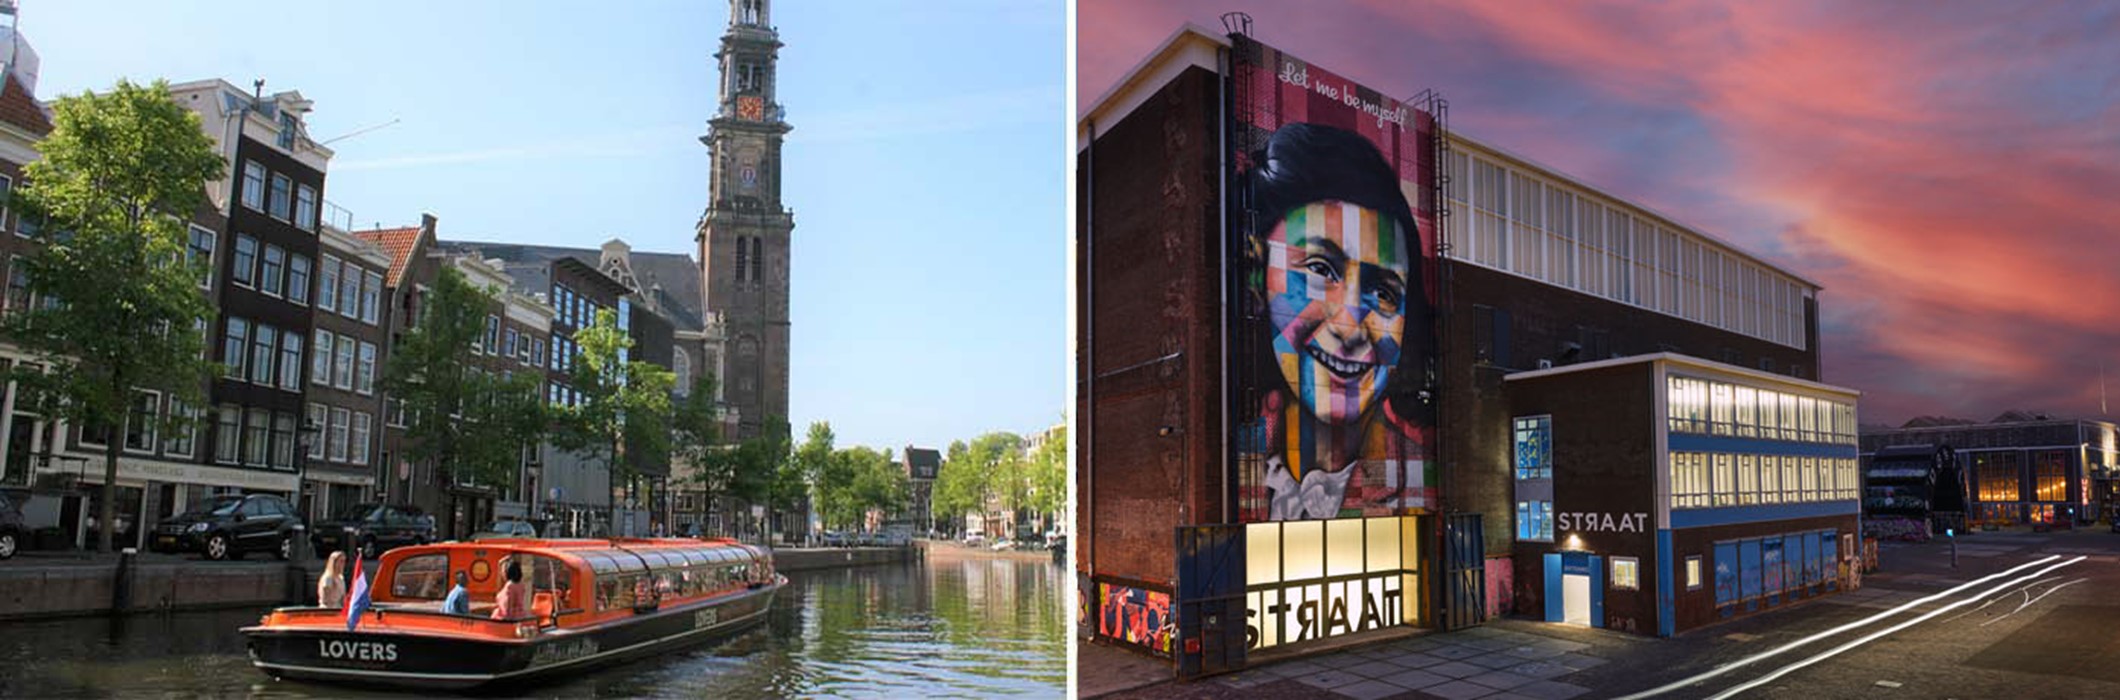 STRAAT Museum + Amsterdam Canal Cruise